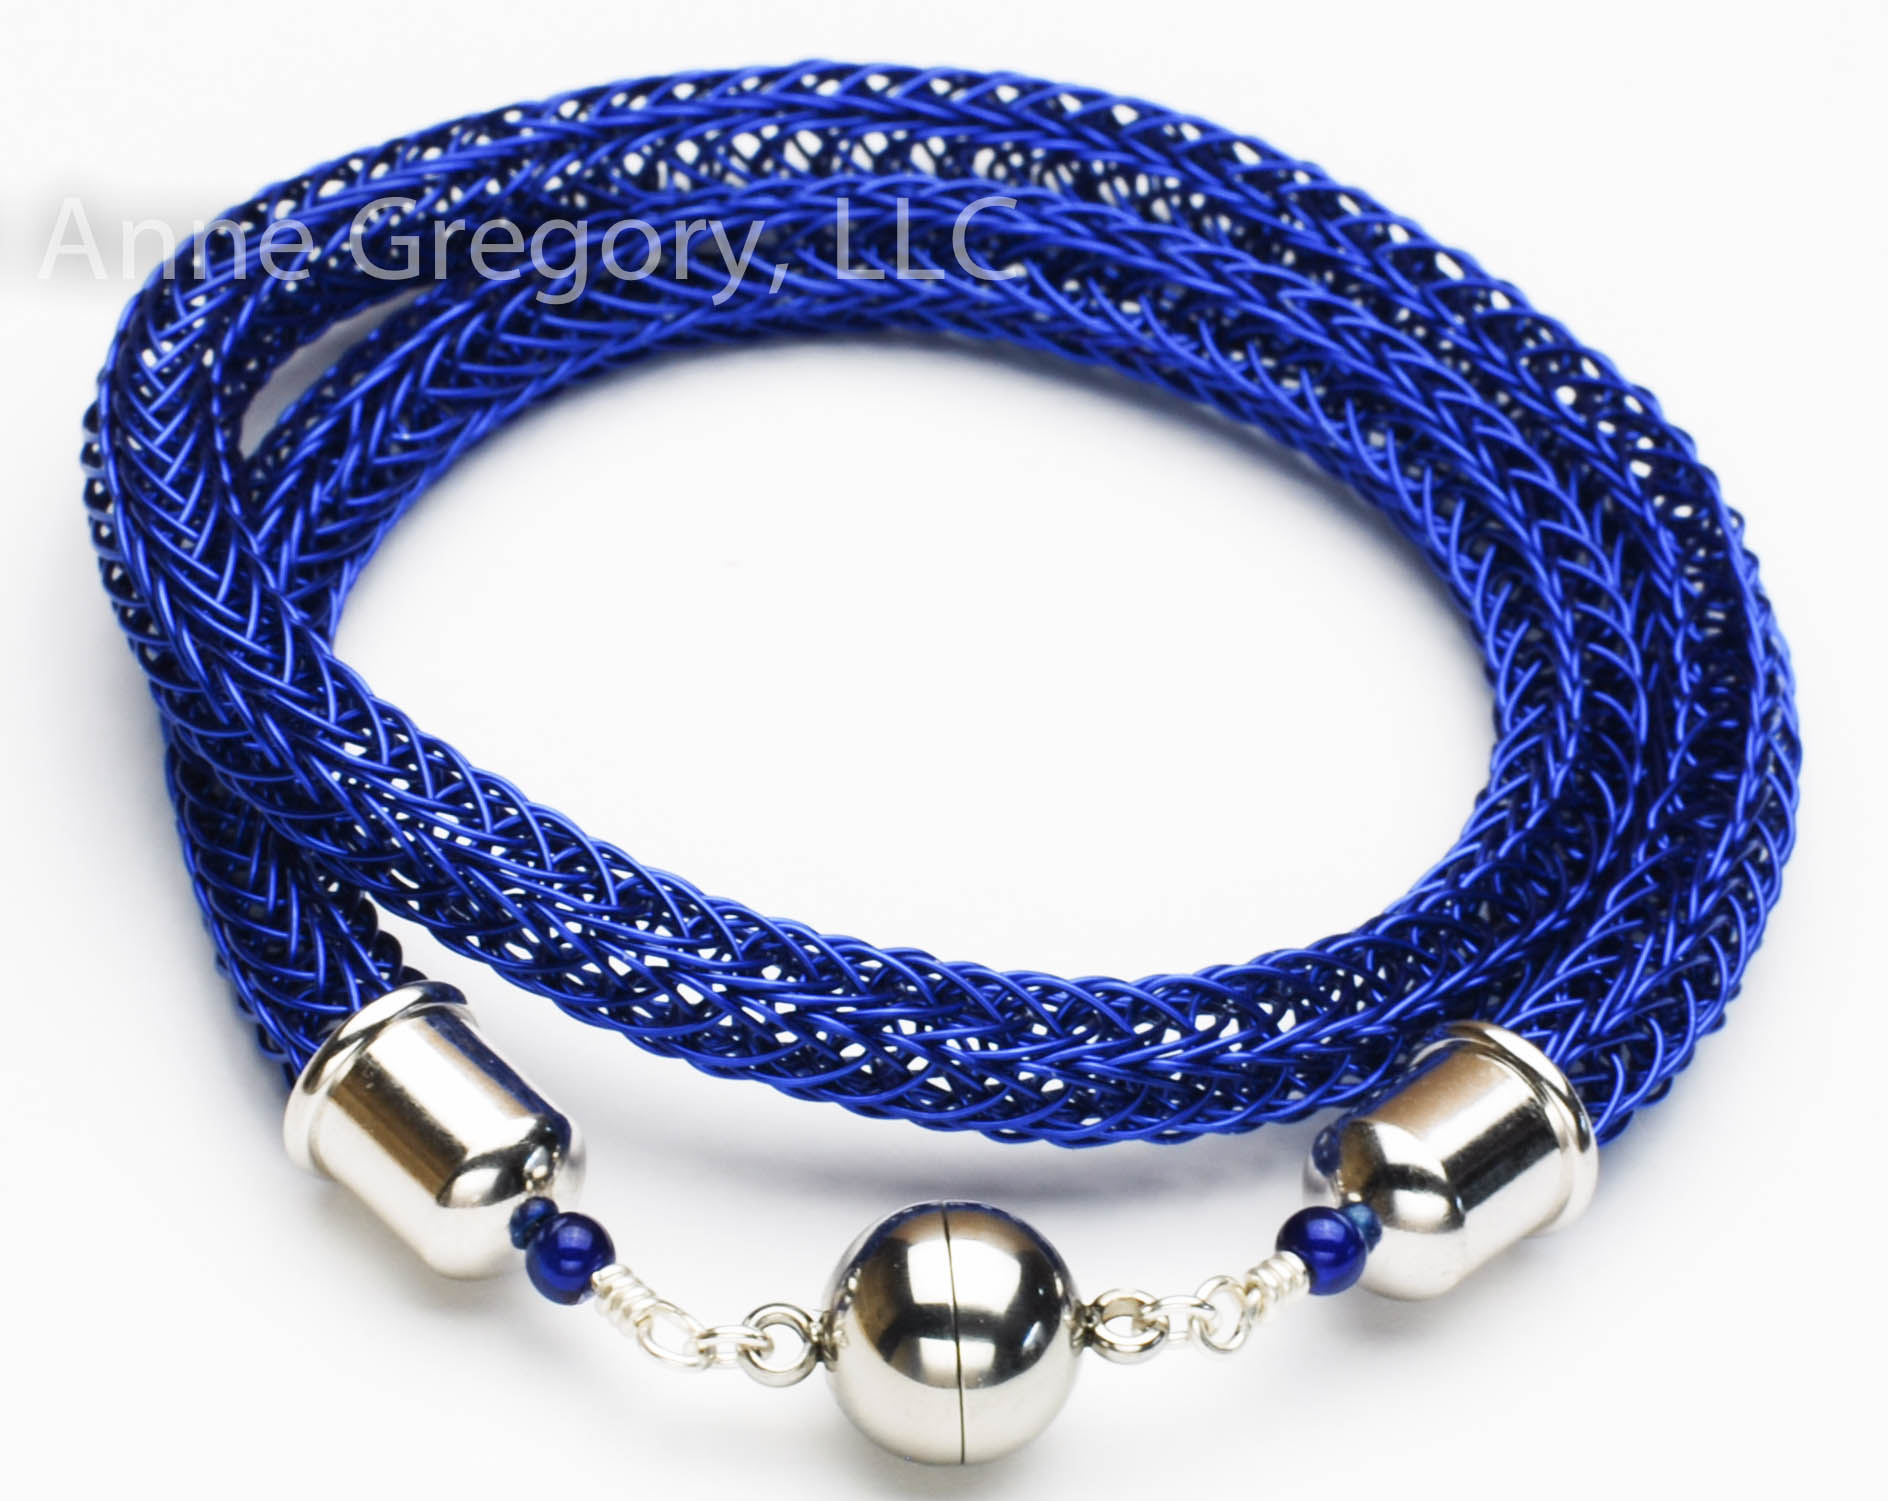 Silver Blue Viking Knit Neck Rope - Anne Gregory, LLC